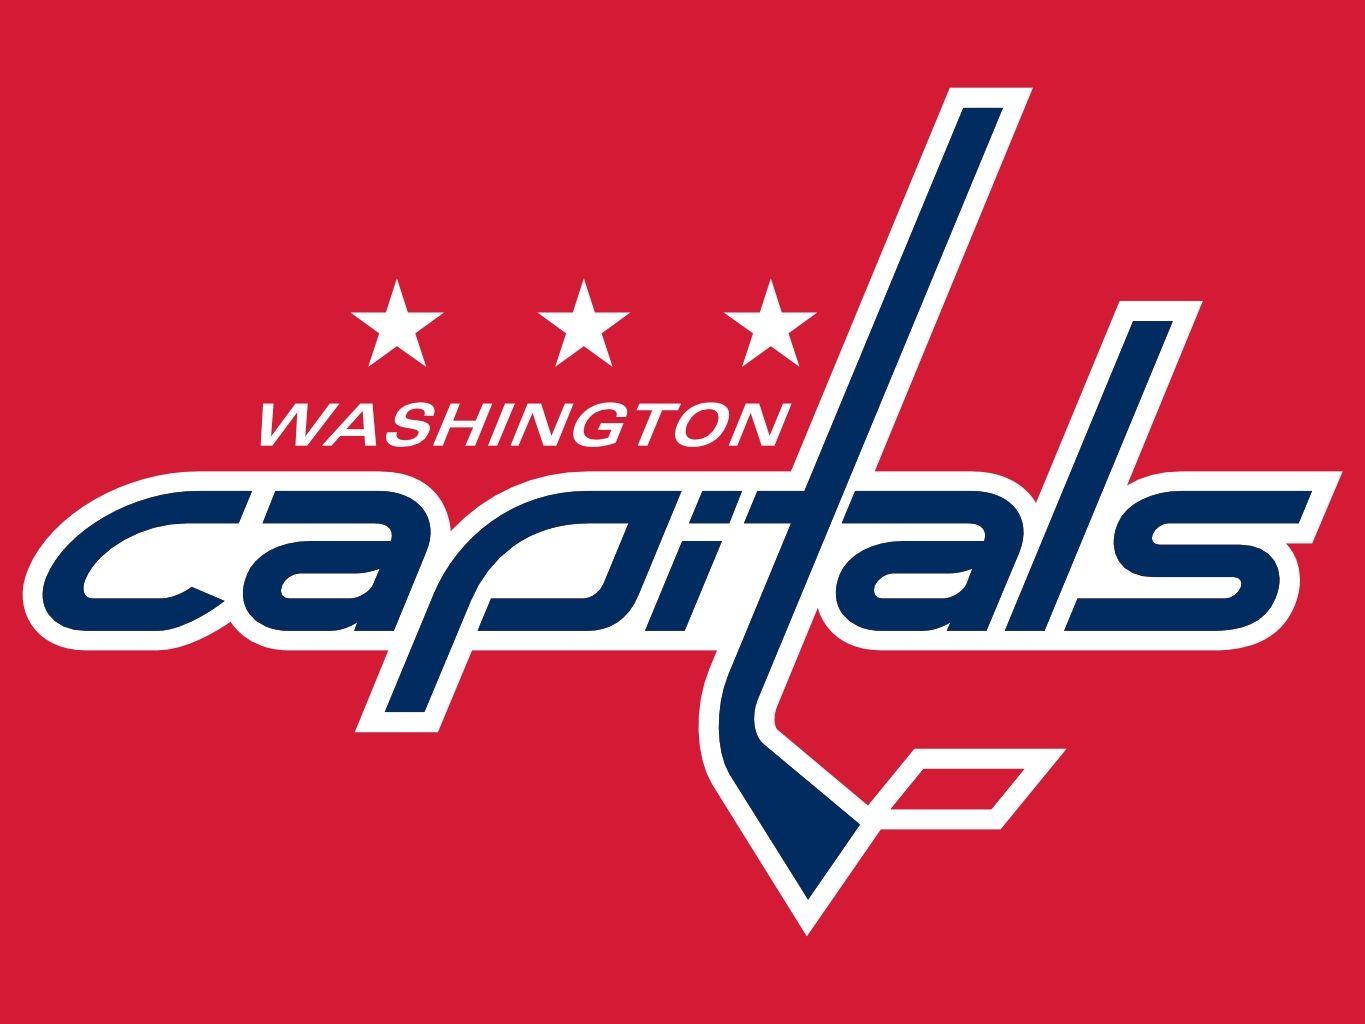 Ed Frankovic weighs in on all things Washington Capitals. We